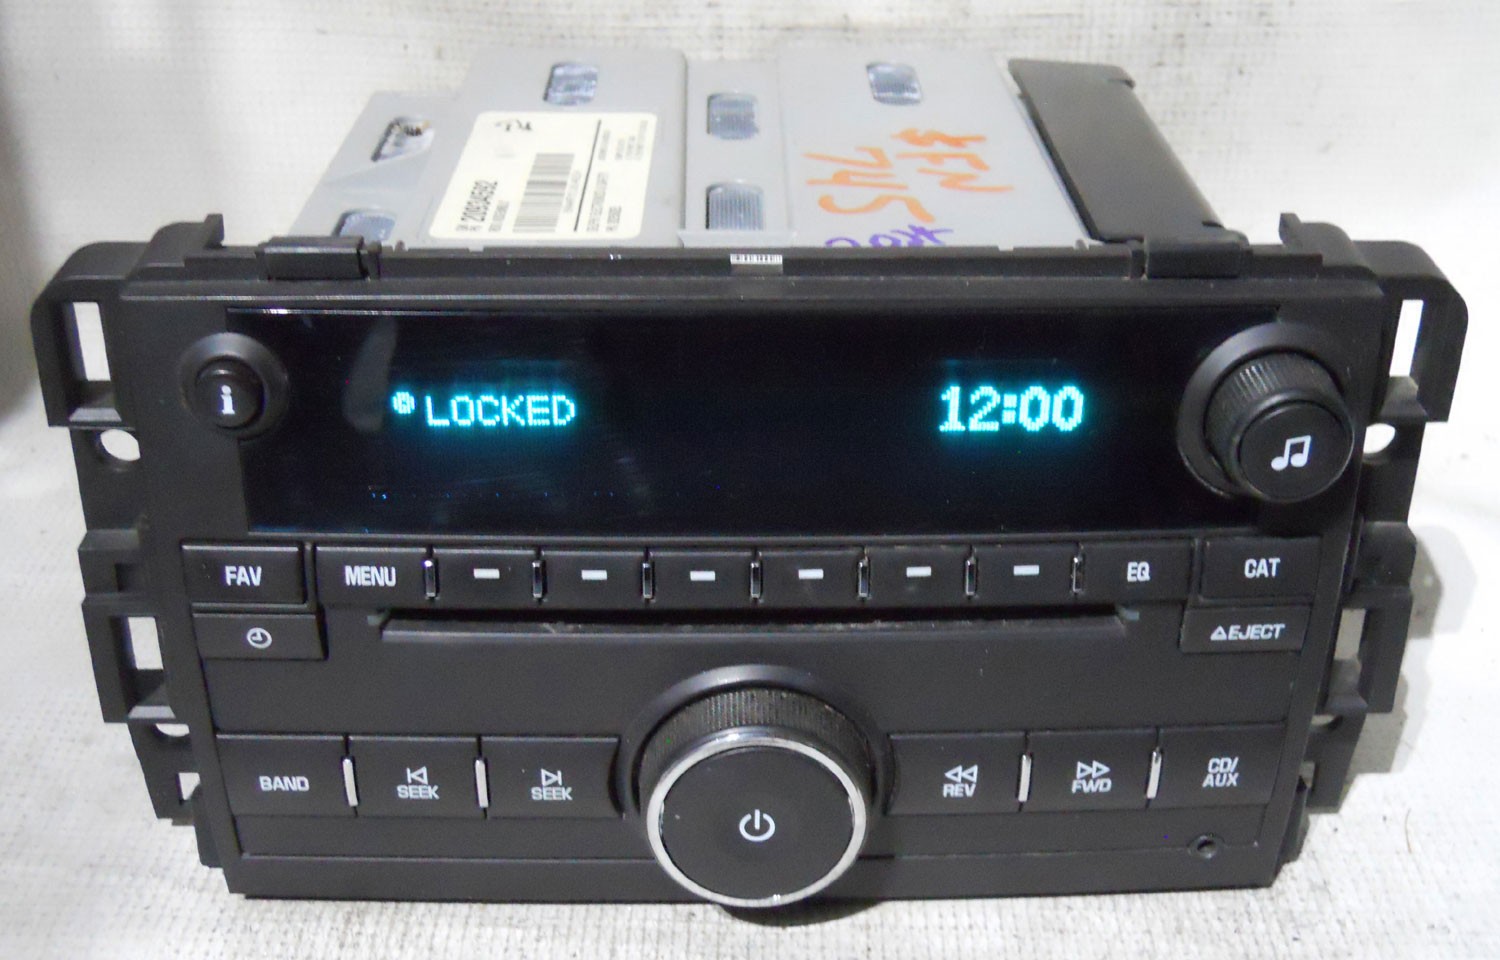 Chevy Tahoe 2007 2008 2009 2010 2011 Factory Stereo CD